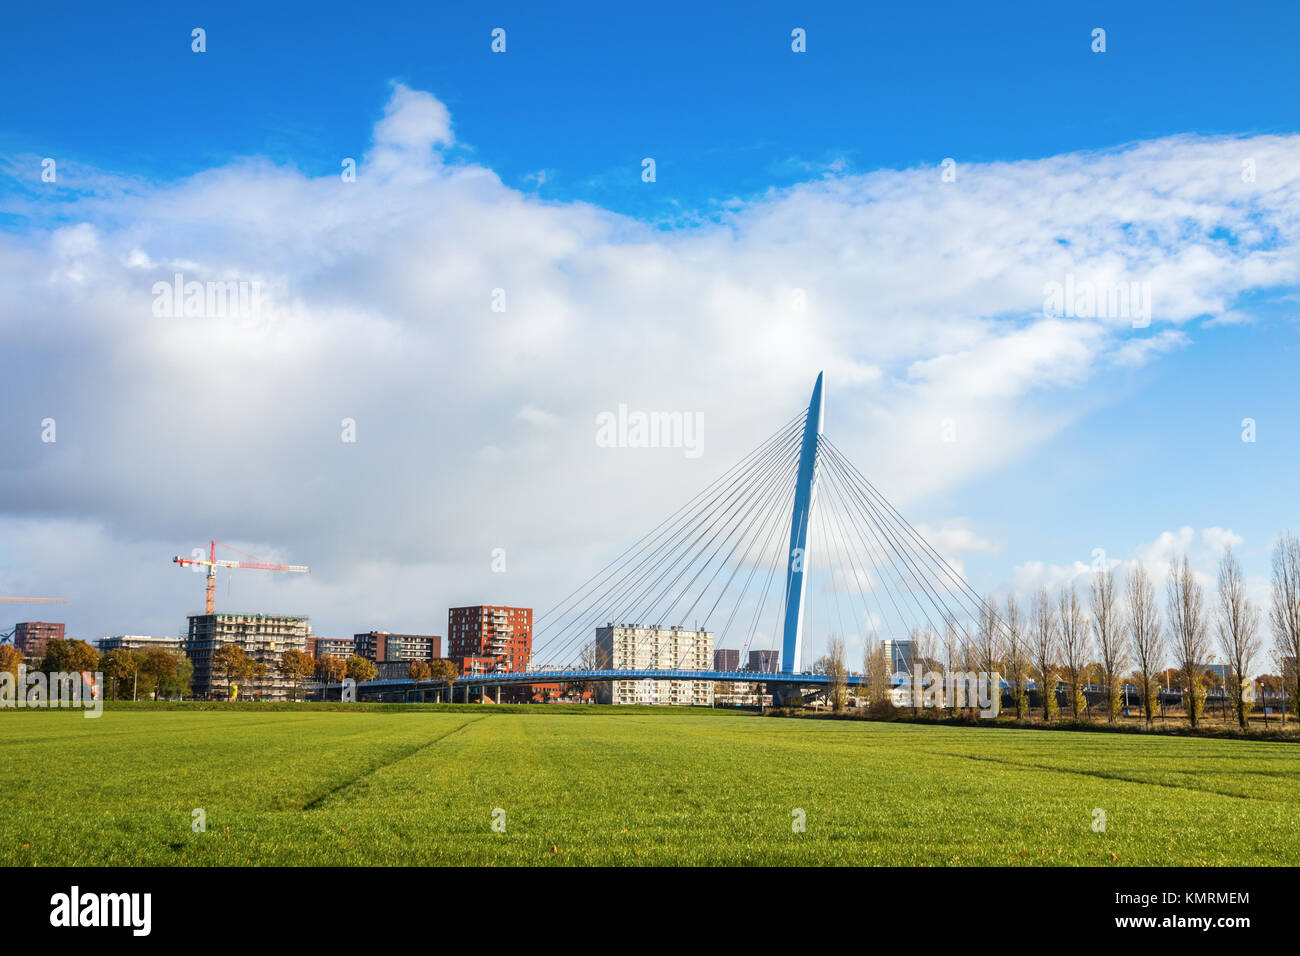 Prince Claus Bridge under a blue sky with clouds. The Prince Claus Bridge is a cable-stayed bridge in Utrecht, The Netherlands. Stock Photo